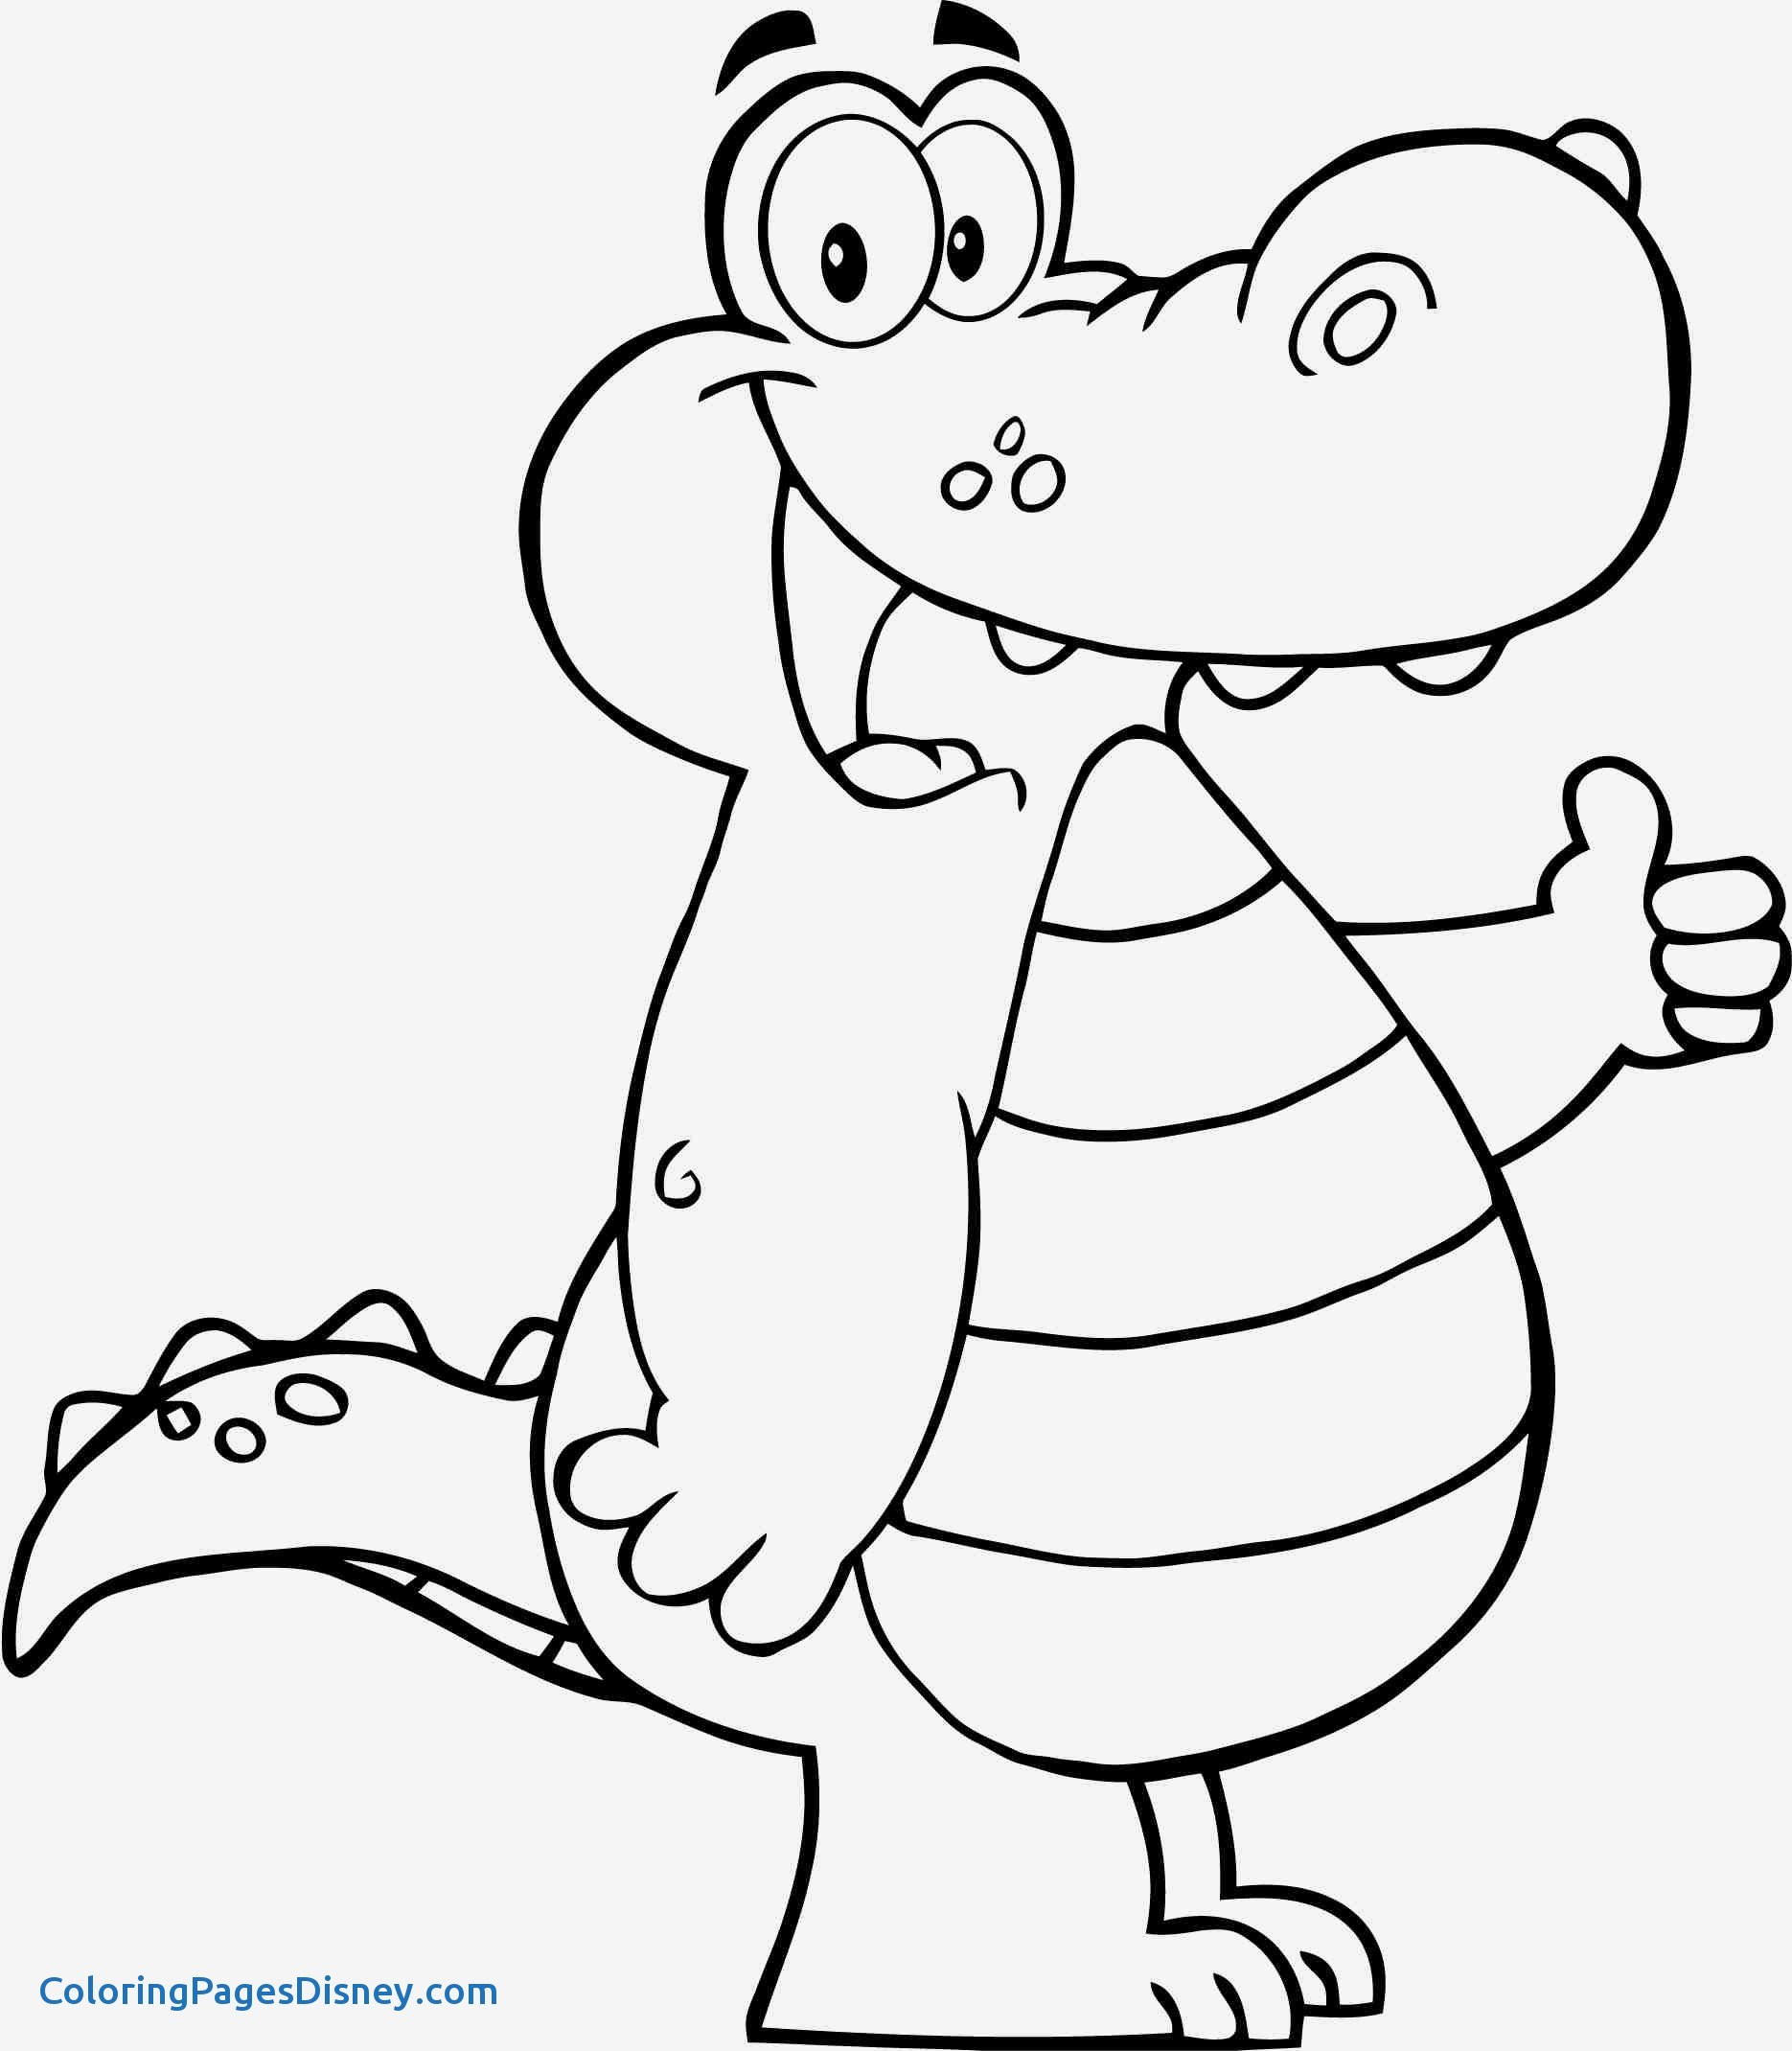 Free Alligator Coloring Pages at GetColorings.com  Free printable